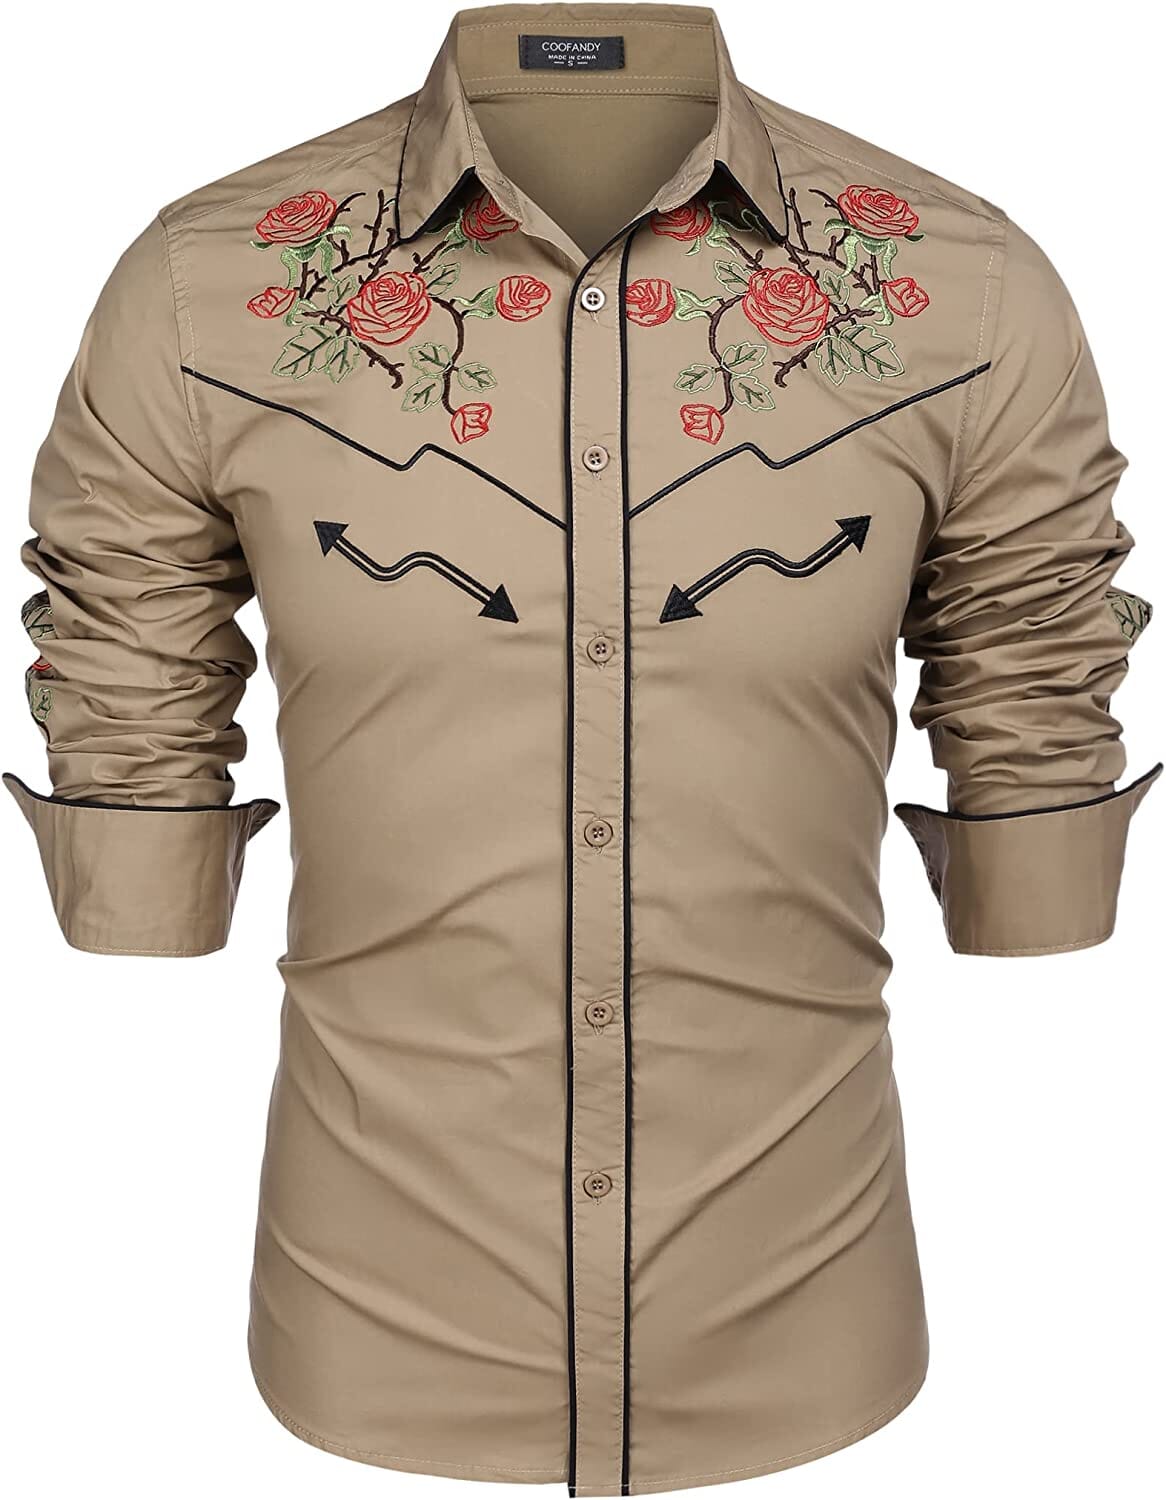 Western Cowboy Embroidered Button Down Cotton Shirt (US Only) Shirts COOFANDY Store Khaki (Rose) S 